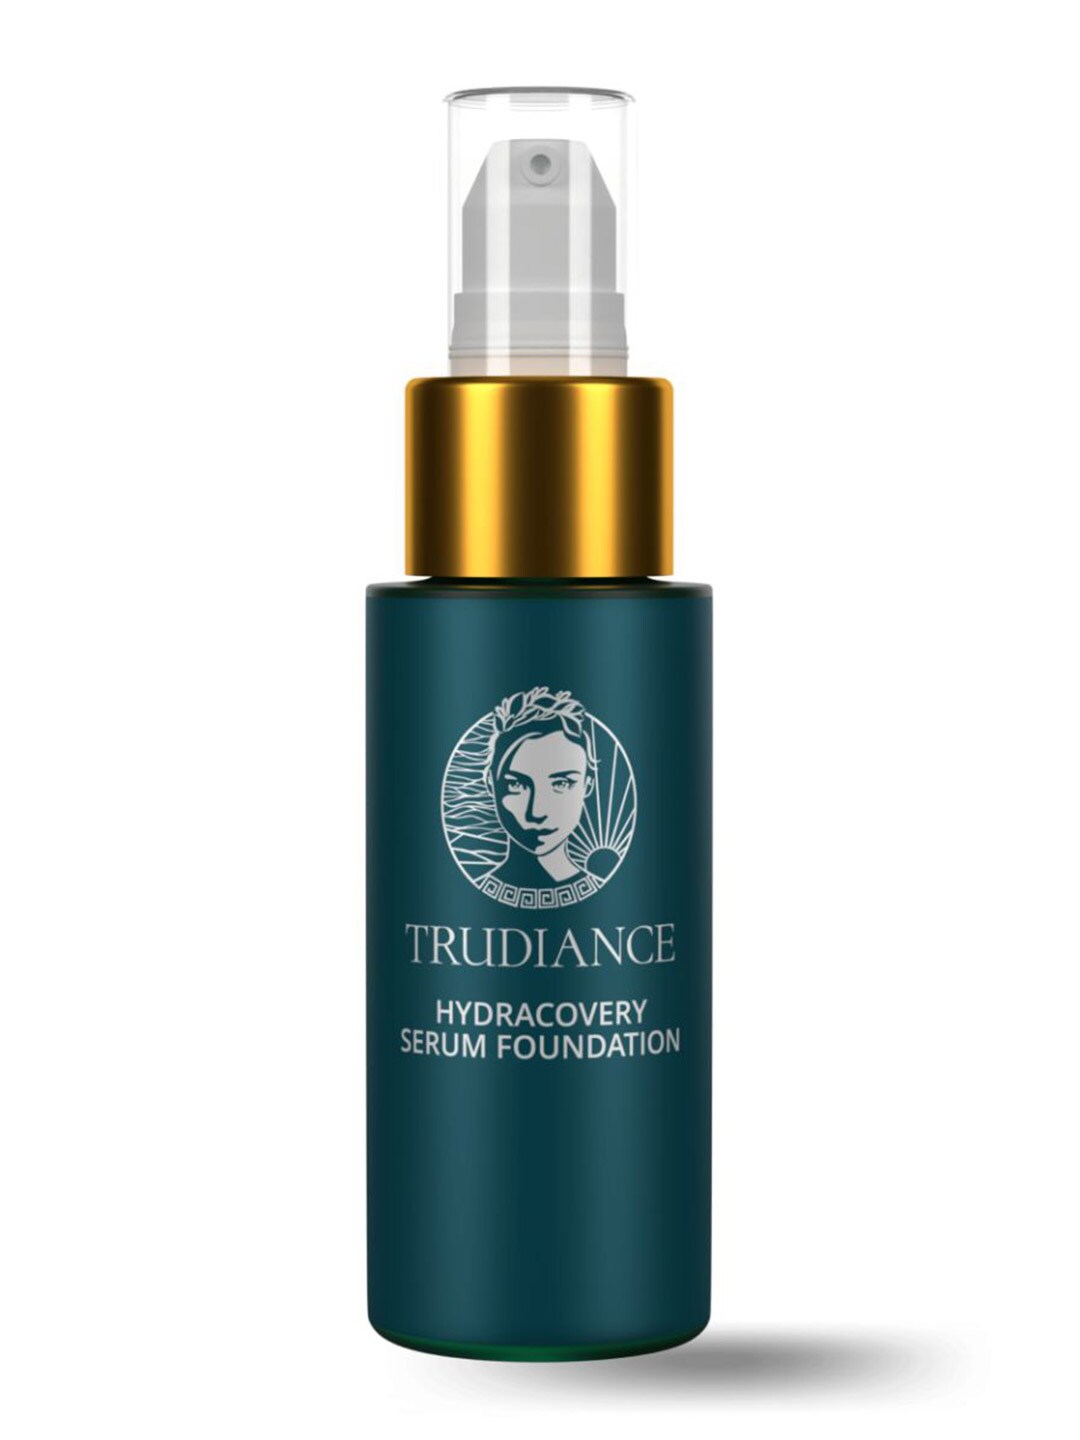 TRUDIANCE HydraCovery Serum Foundation - 30 ml Price in India